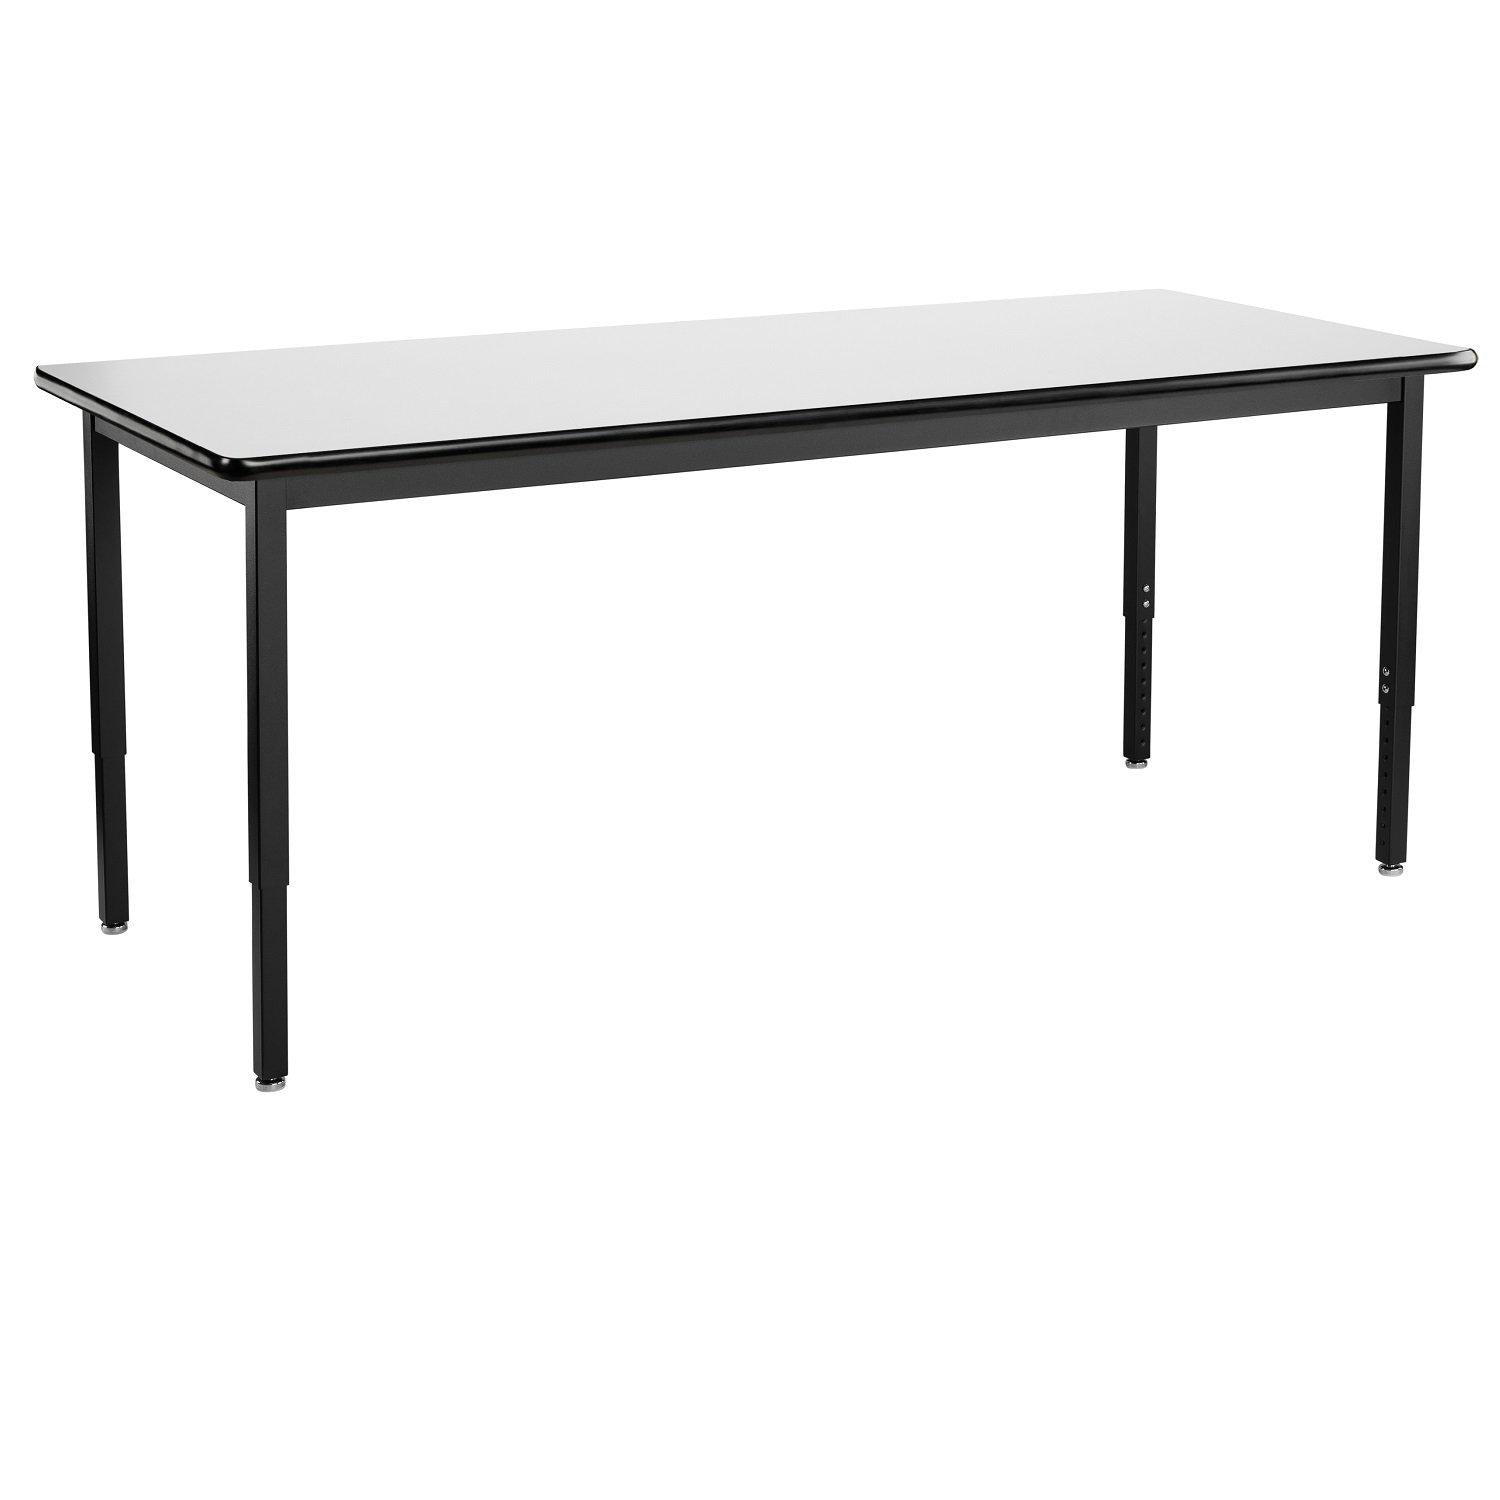 Heavy-Duty Height-Adjustable Utility Table, Black Frame, 24" x 96", Whiteboard High-Pressure Laminate Top